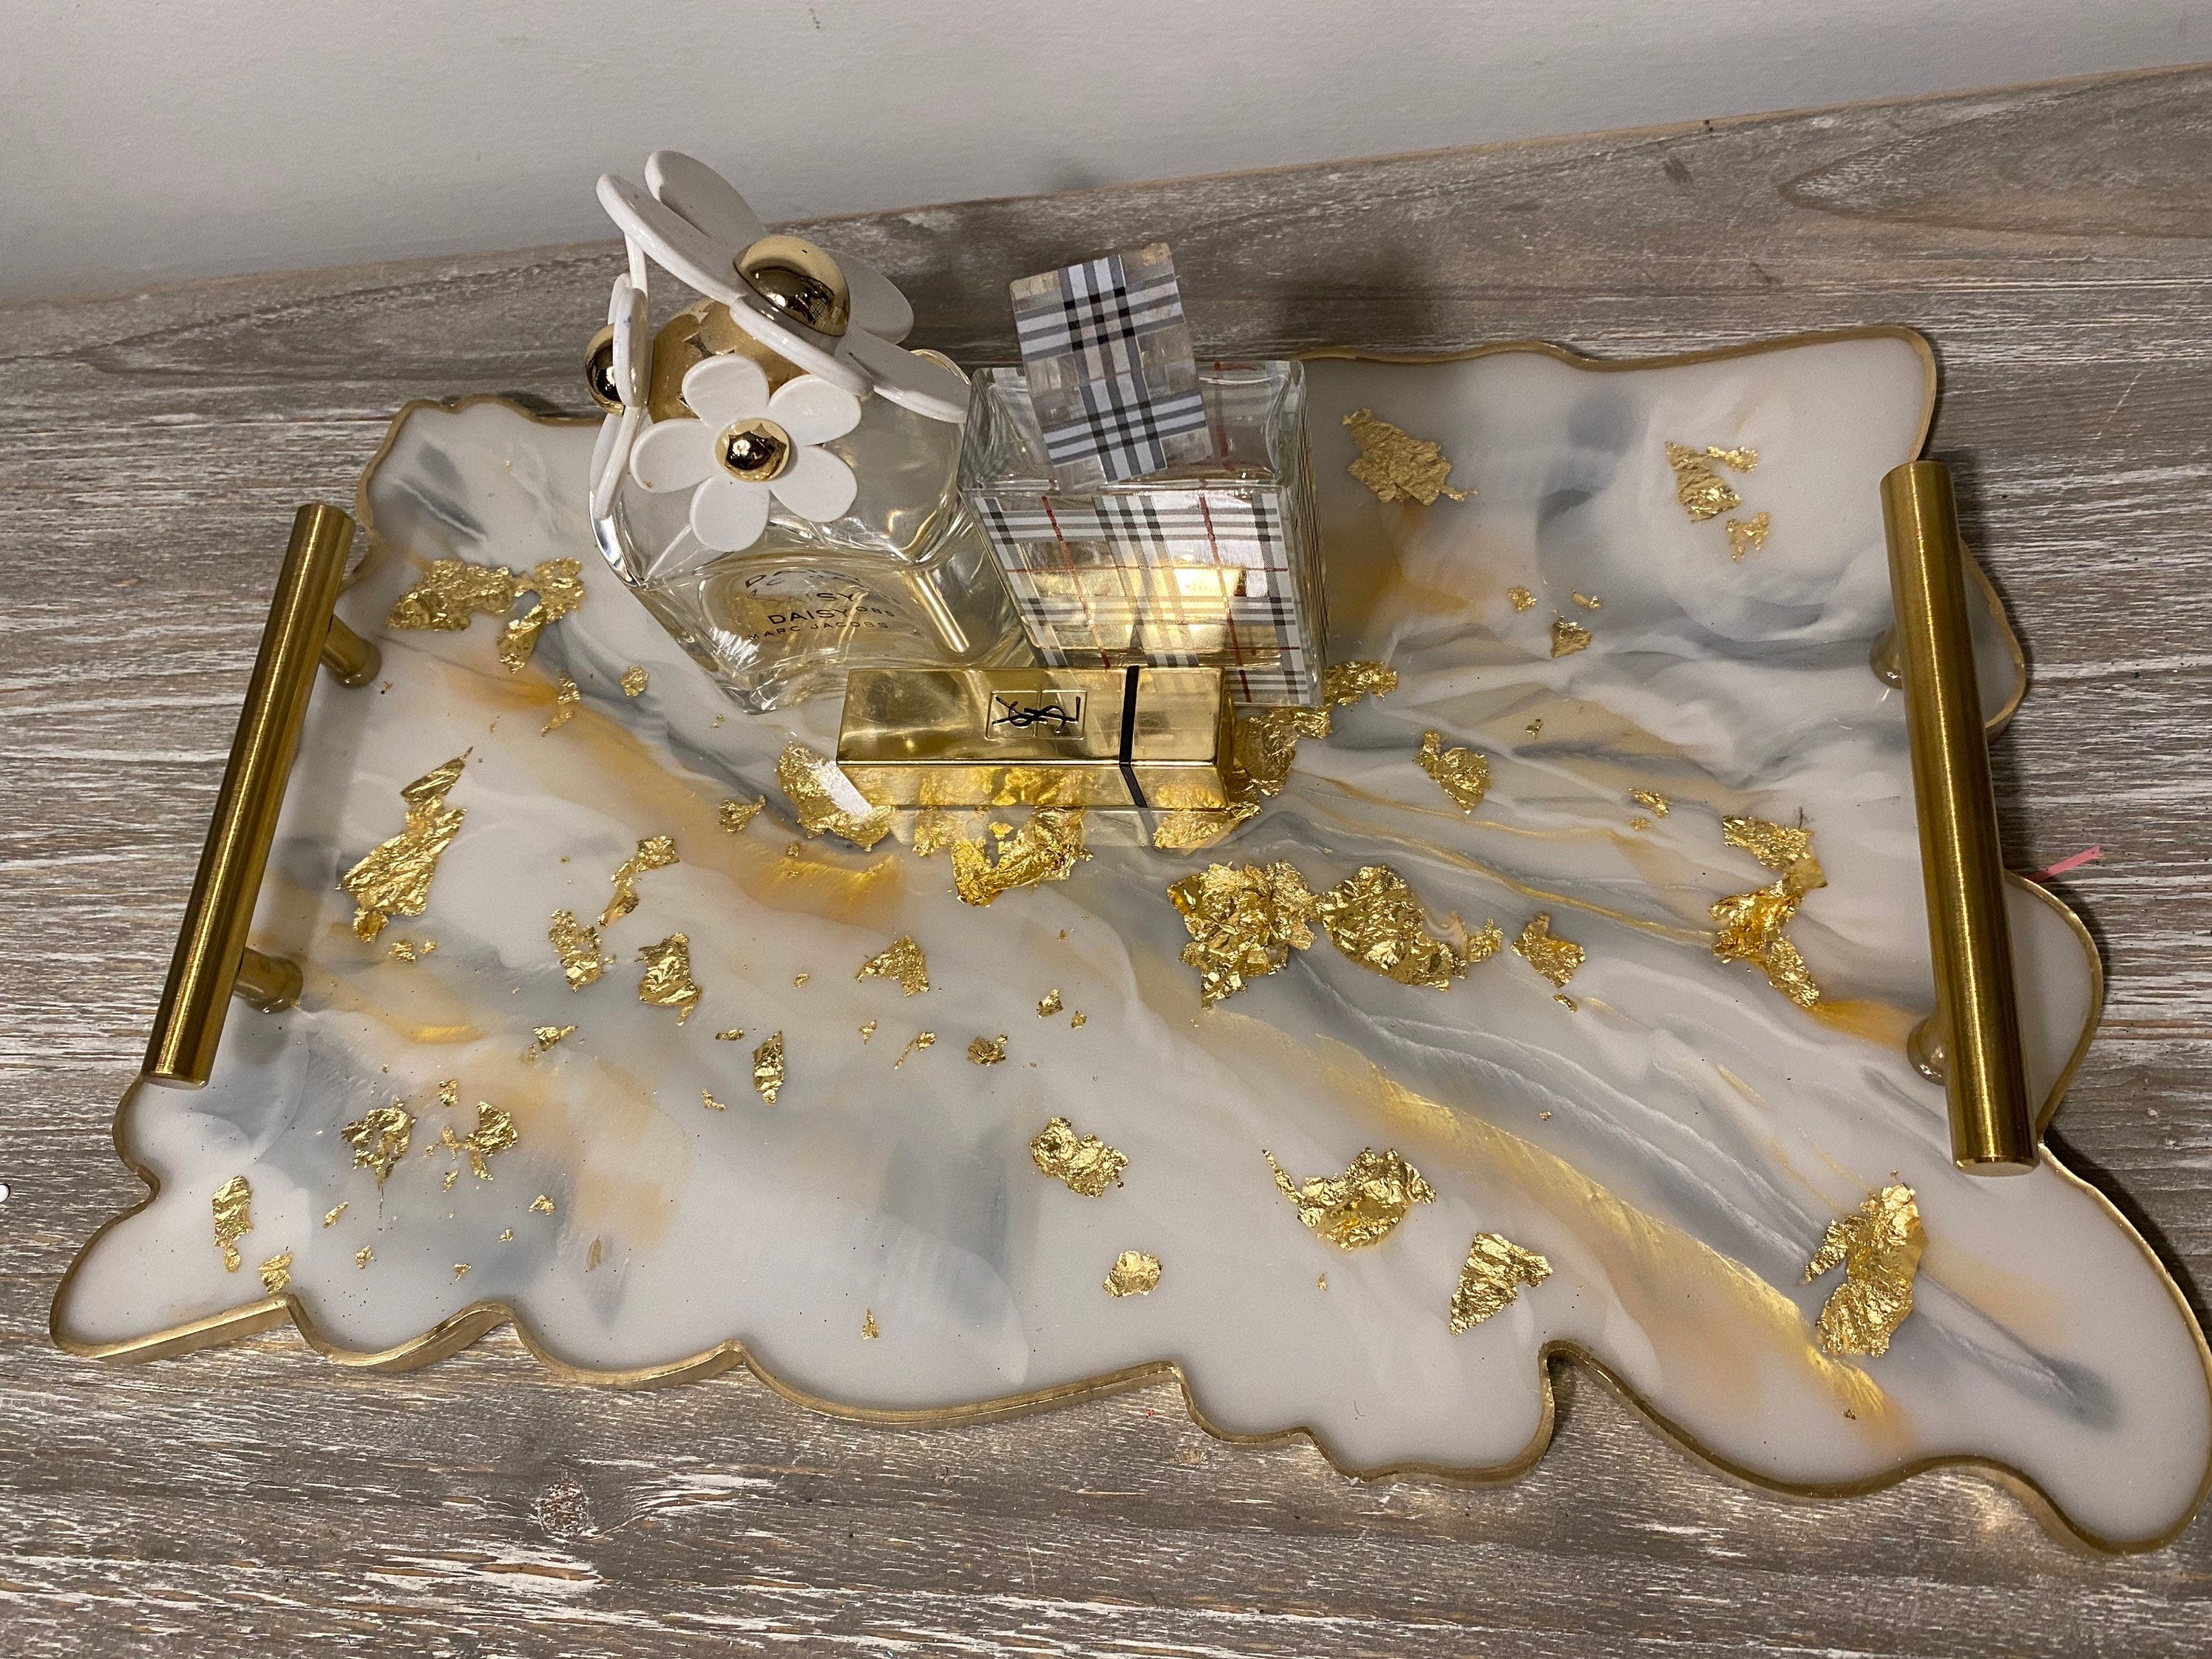 GOLD LEAF & SILVER Marble | Luxury Vanity Tray | Perfume Holder| Serving Tray | Desk Art | Resin Tray | Jewelry Holder | Gold Marble Tray